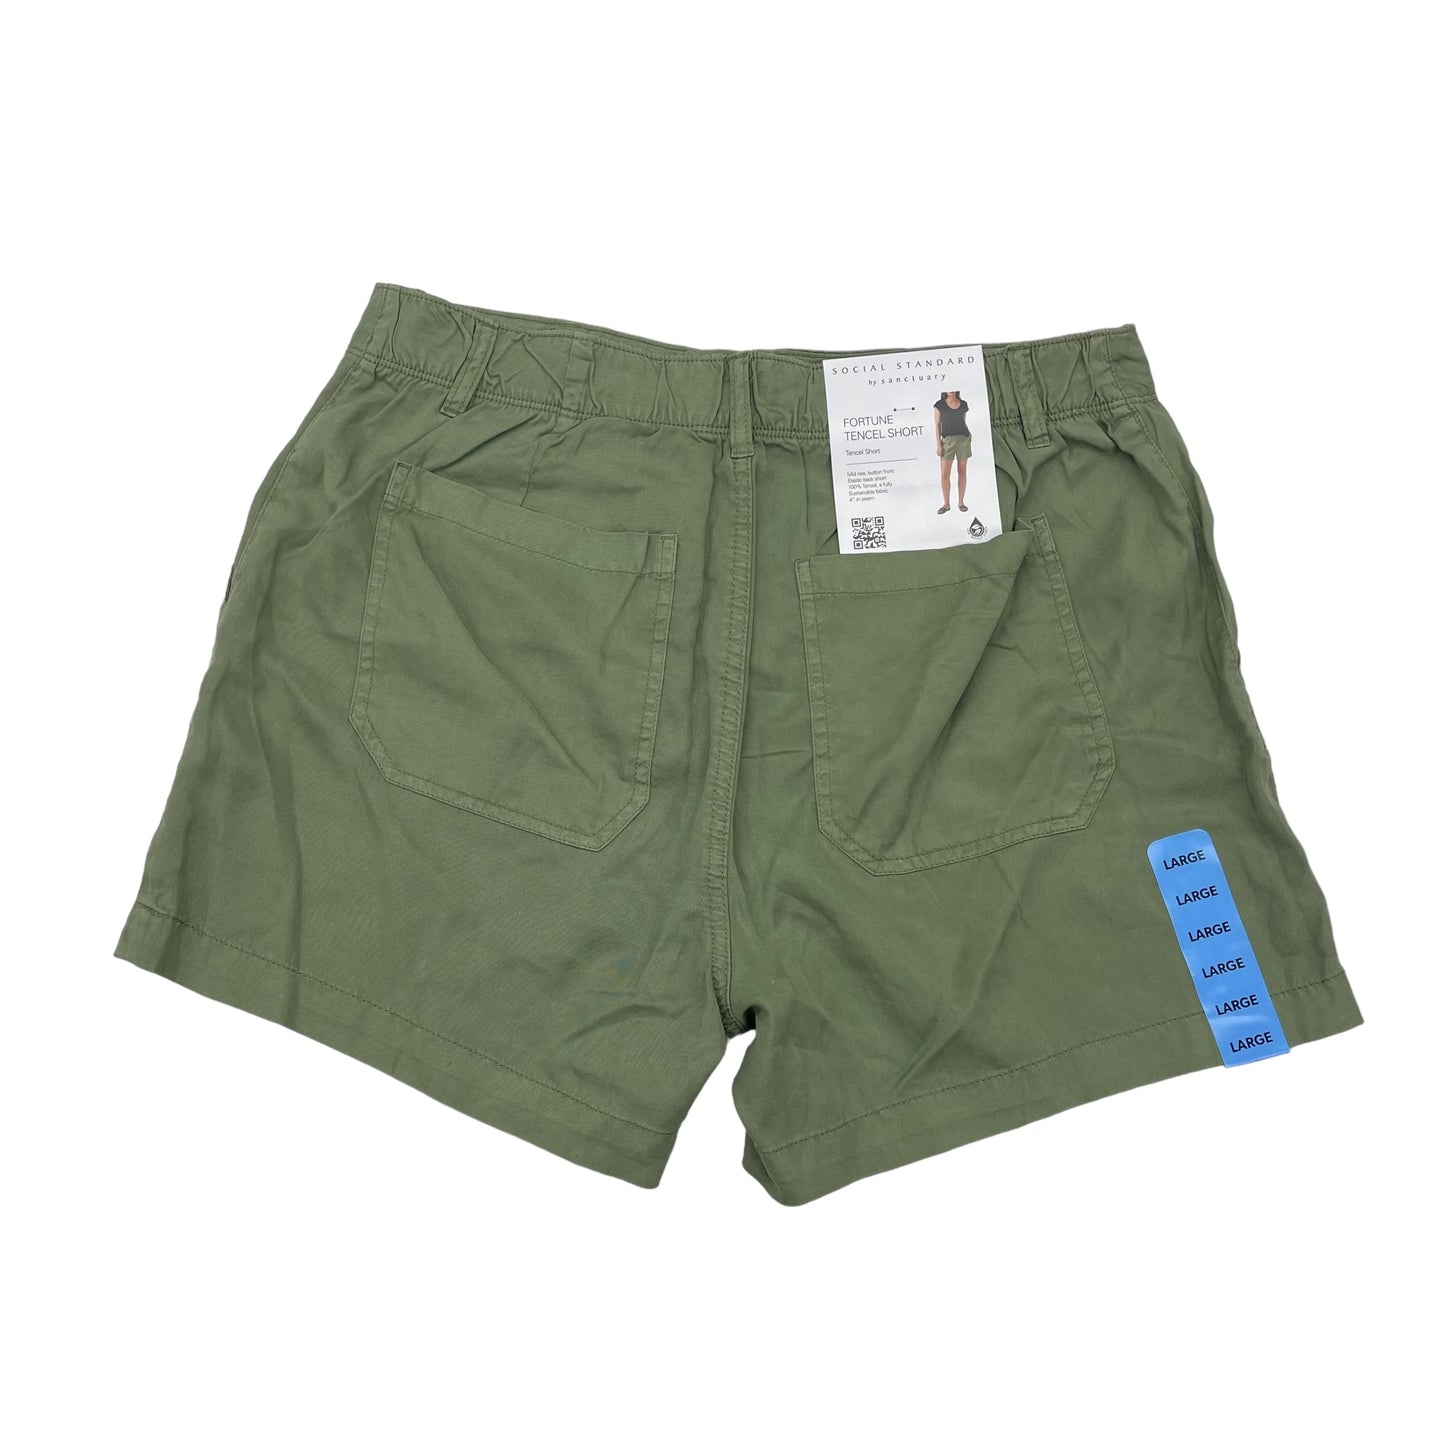 GREEN SHORTS by SOCIAL STANDARD BY SANCTUARY Size:L